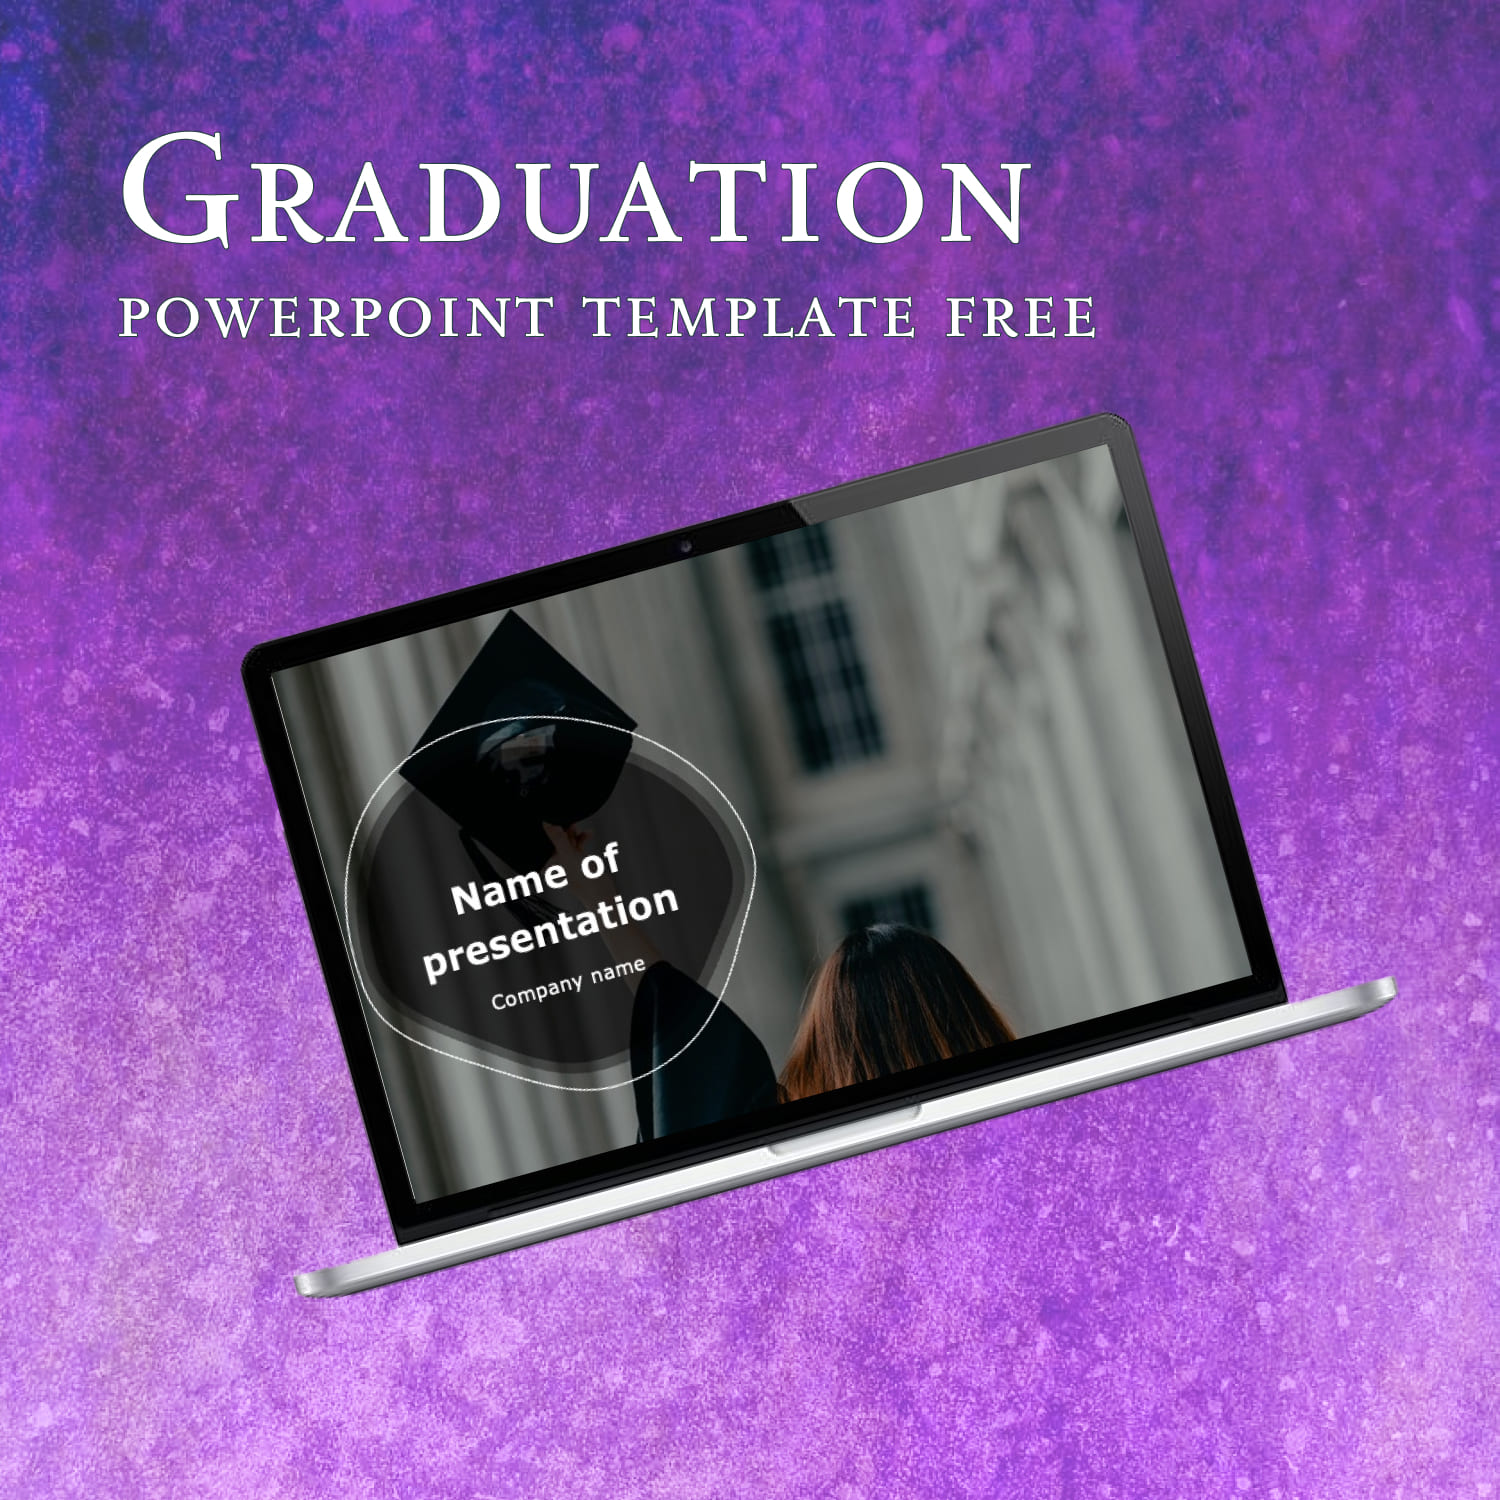 Preview images Graduation Powerpoint Template Free.